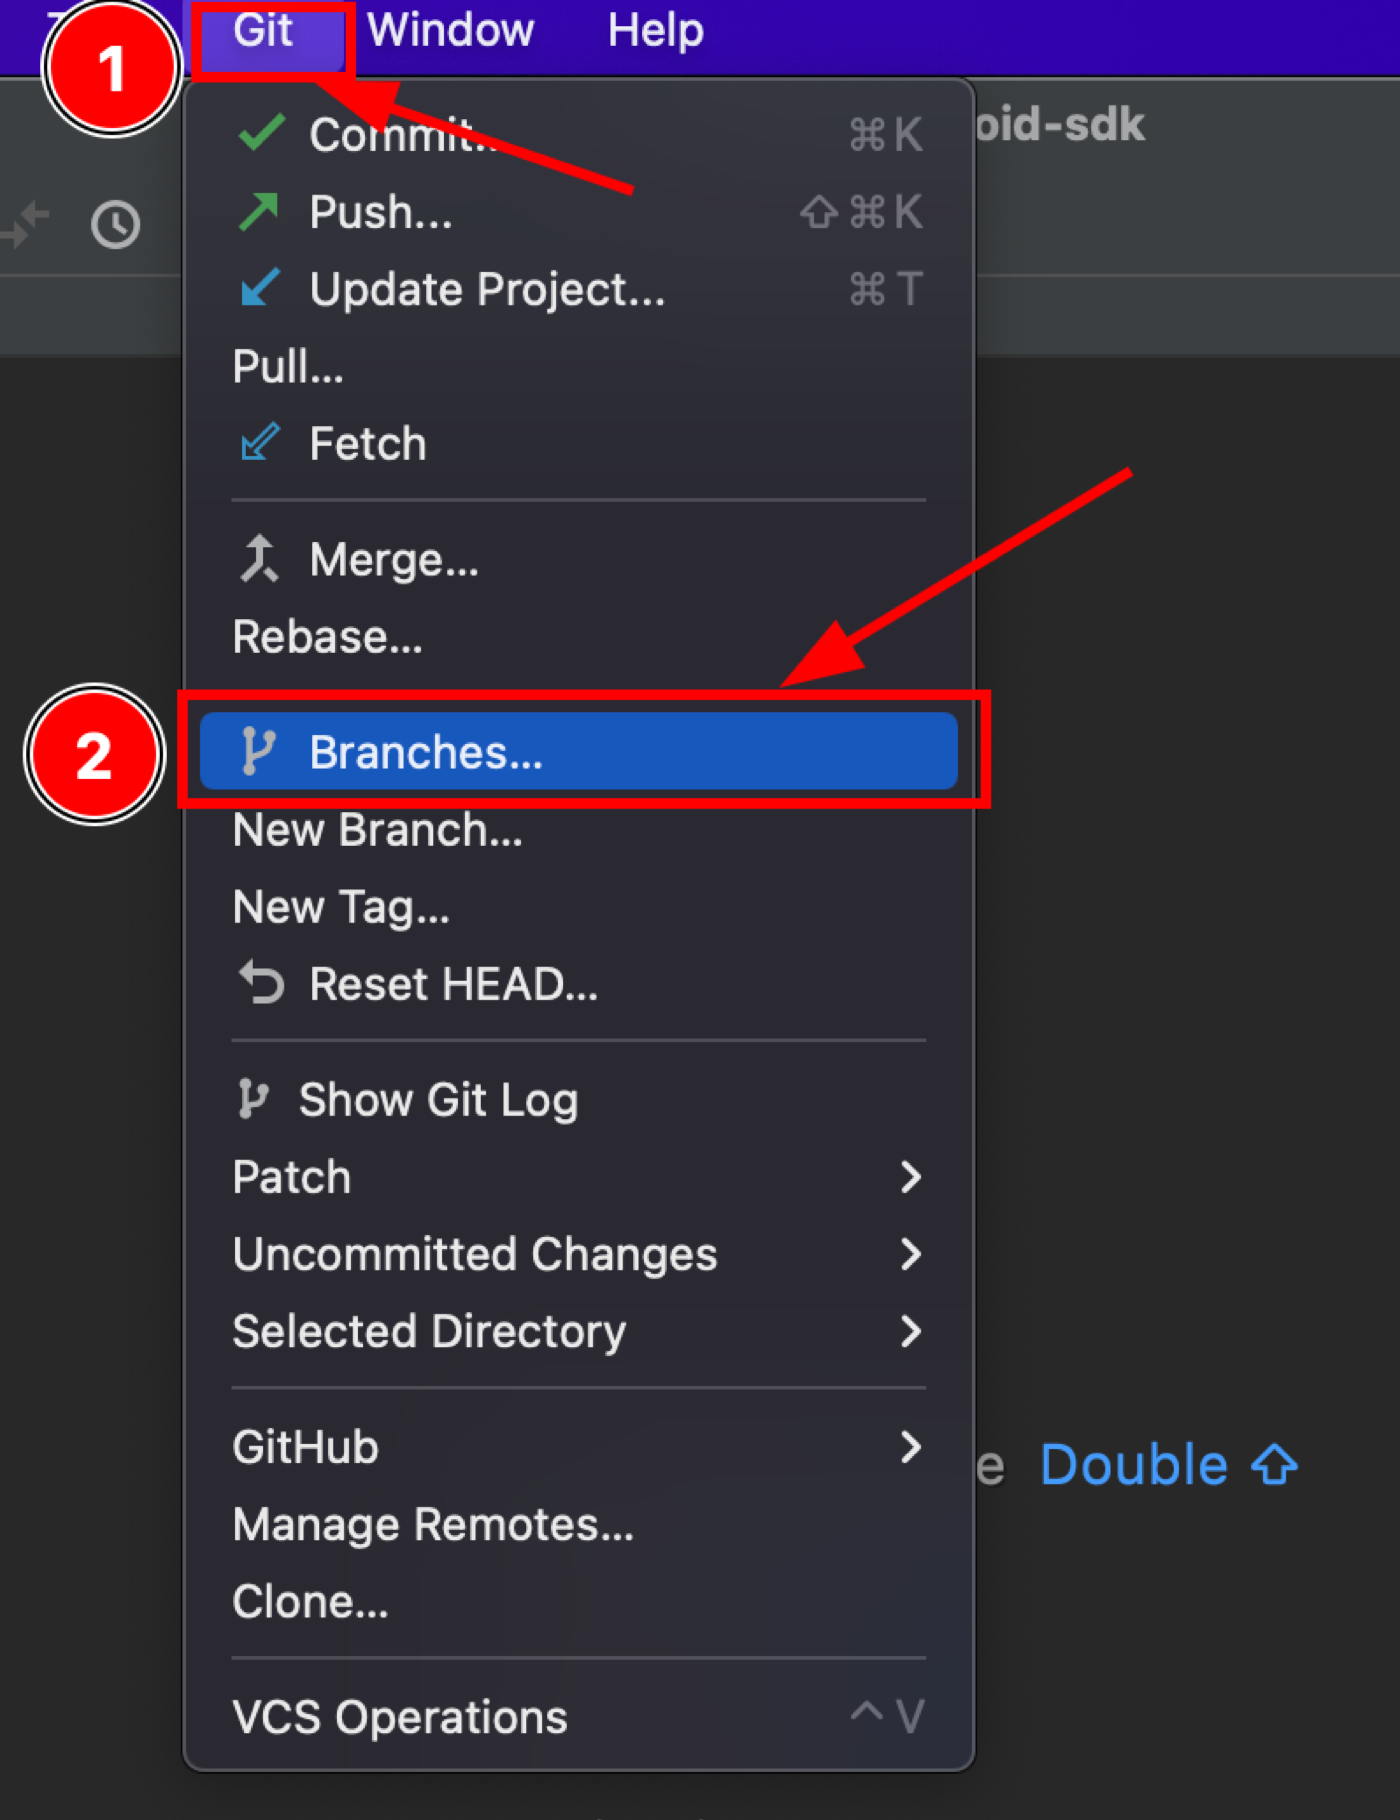 Create a new branch using Android Studio